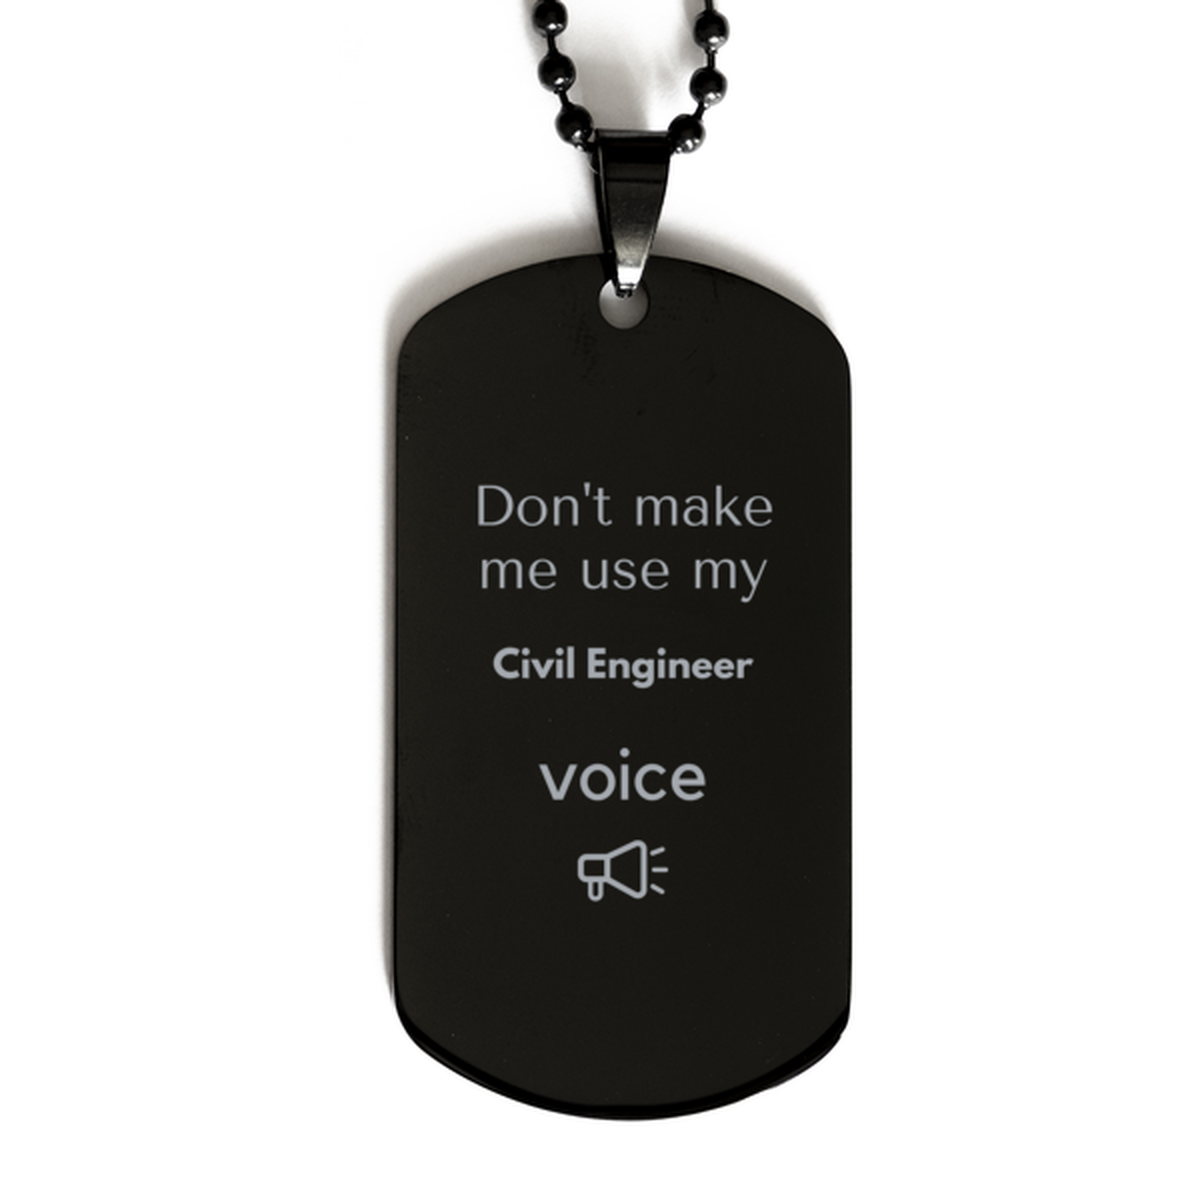 Don't make me use my Civil Engineer voice, Sarcasm Civil Engineer Gifts, Christmas Civil Engineer Black Dog Tag Birthday Unique Gifts For Civil Engineer Coworkers, Men, Women, Colleague, Friends